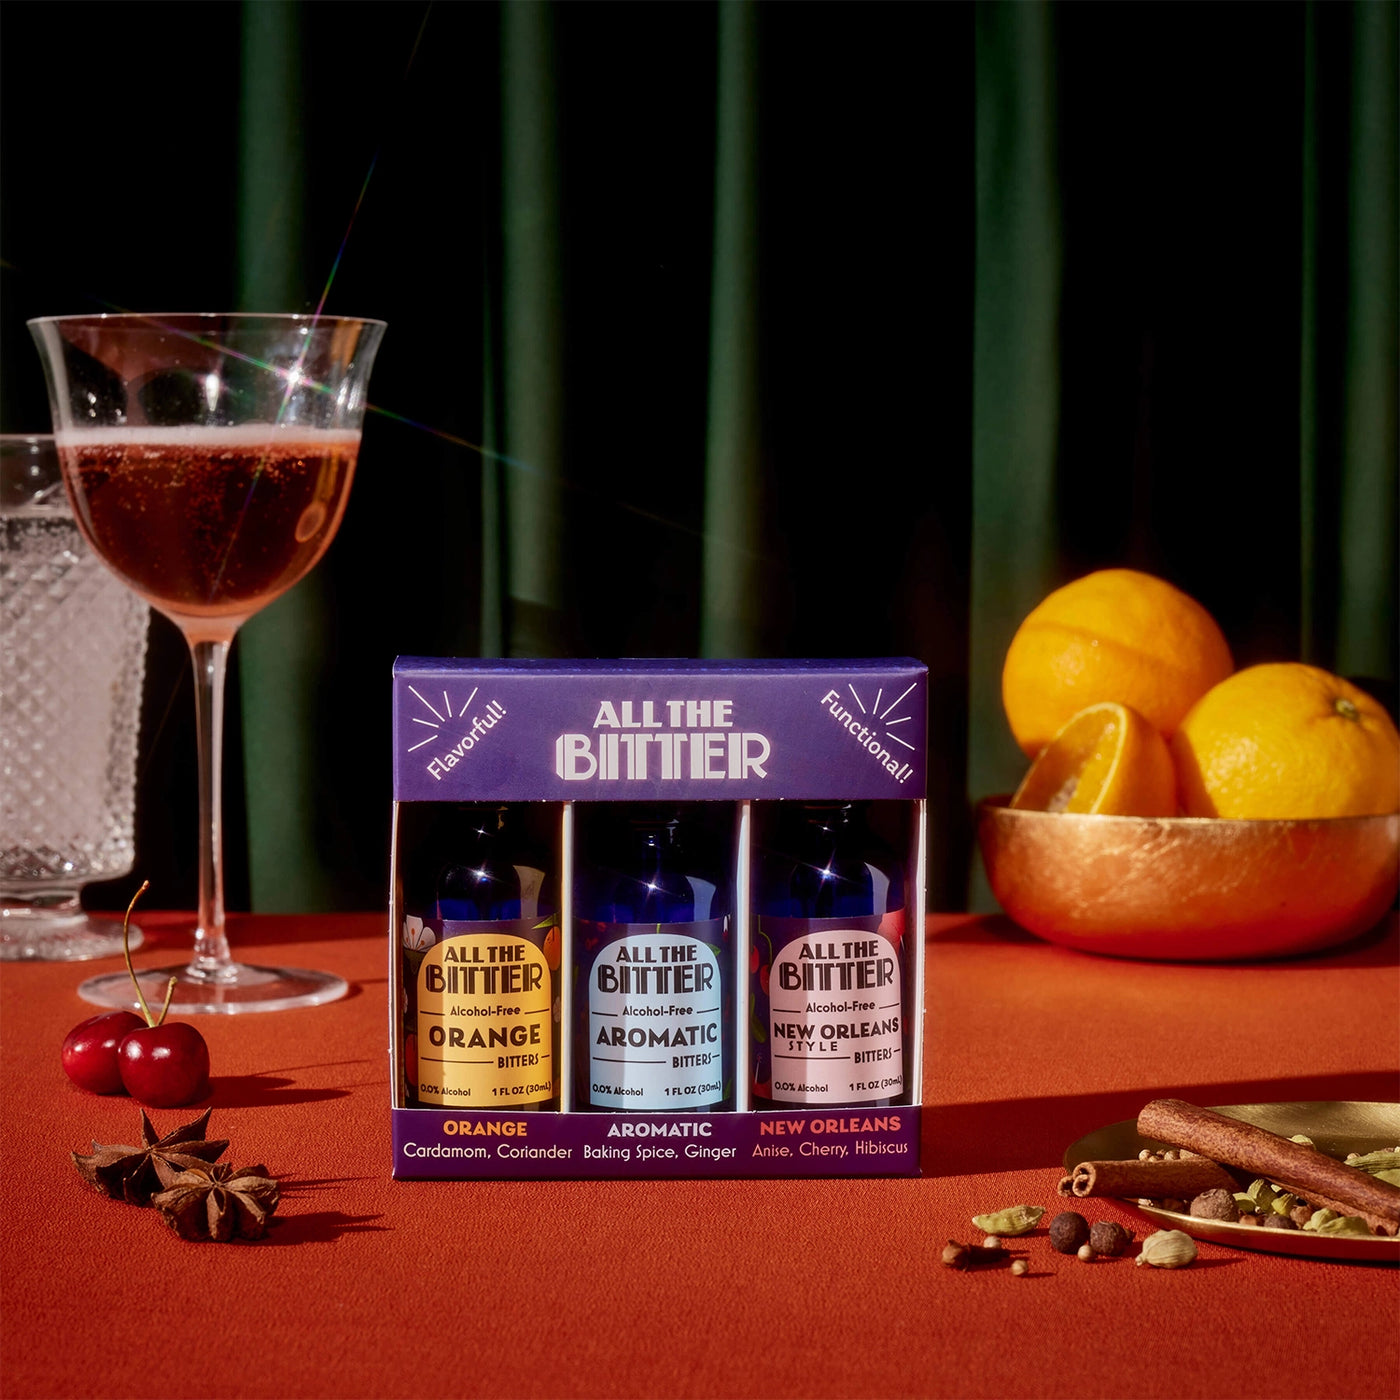 All the bitter non-alcoholic bitters